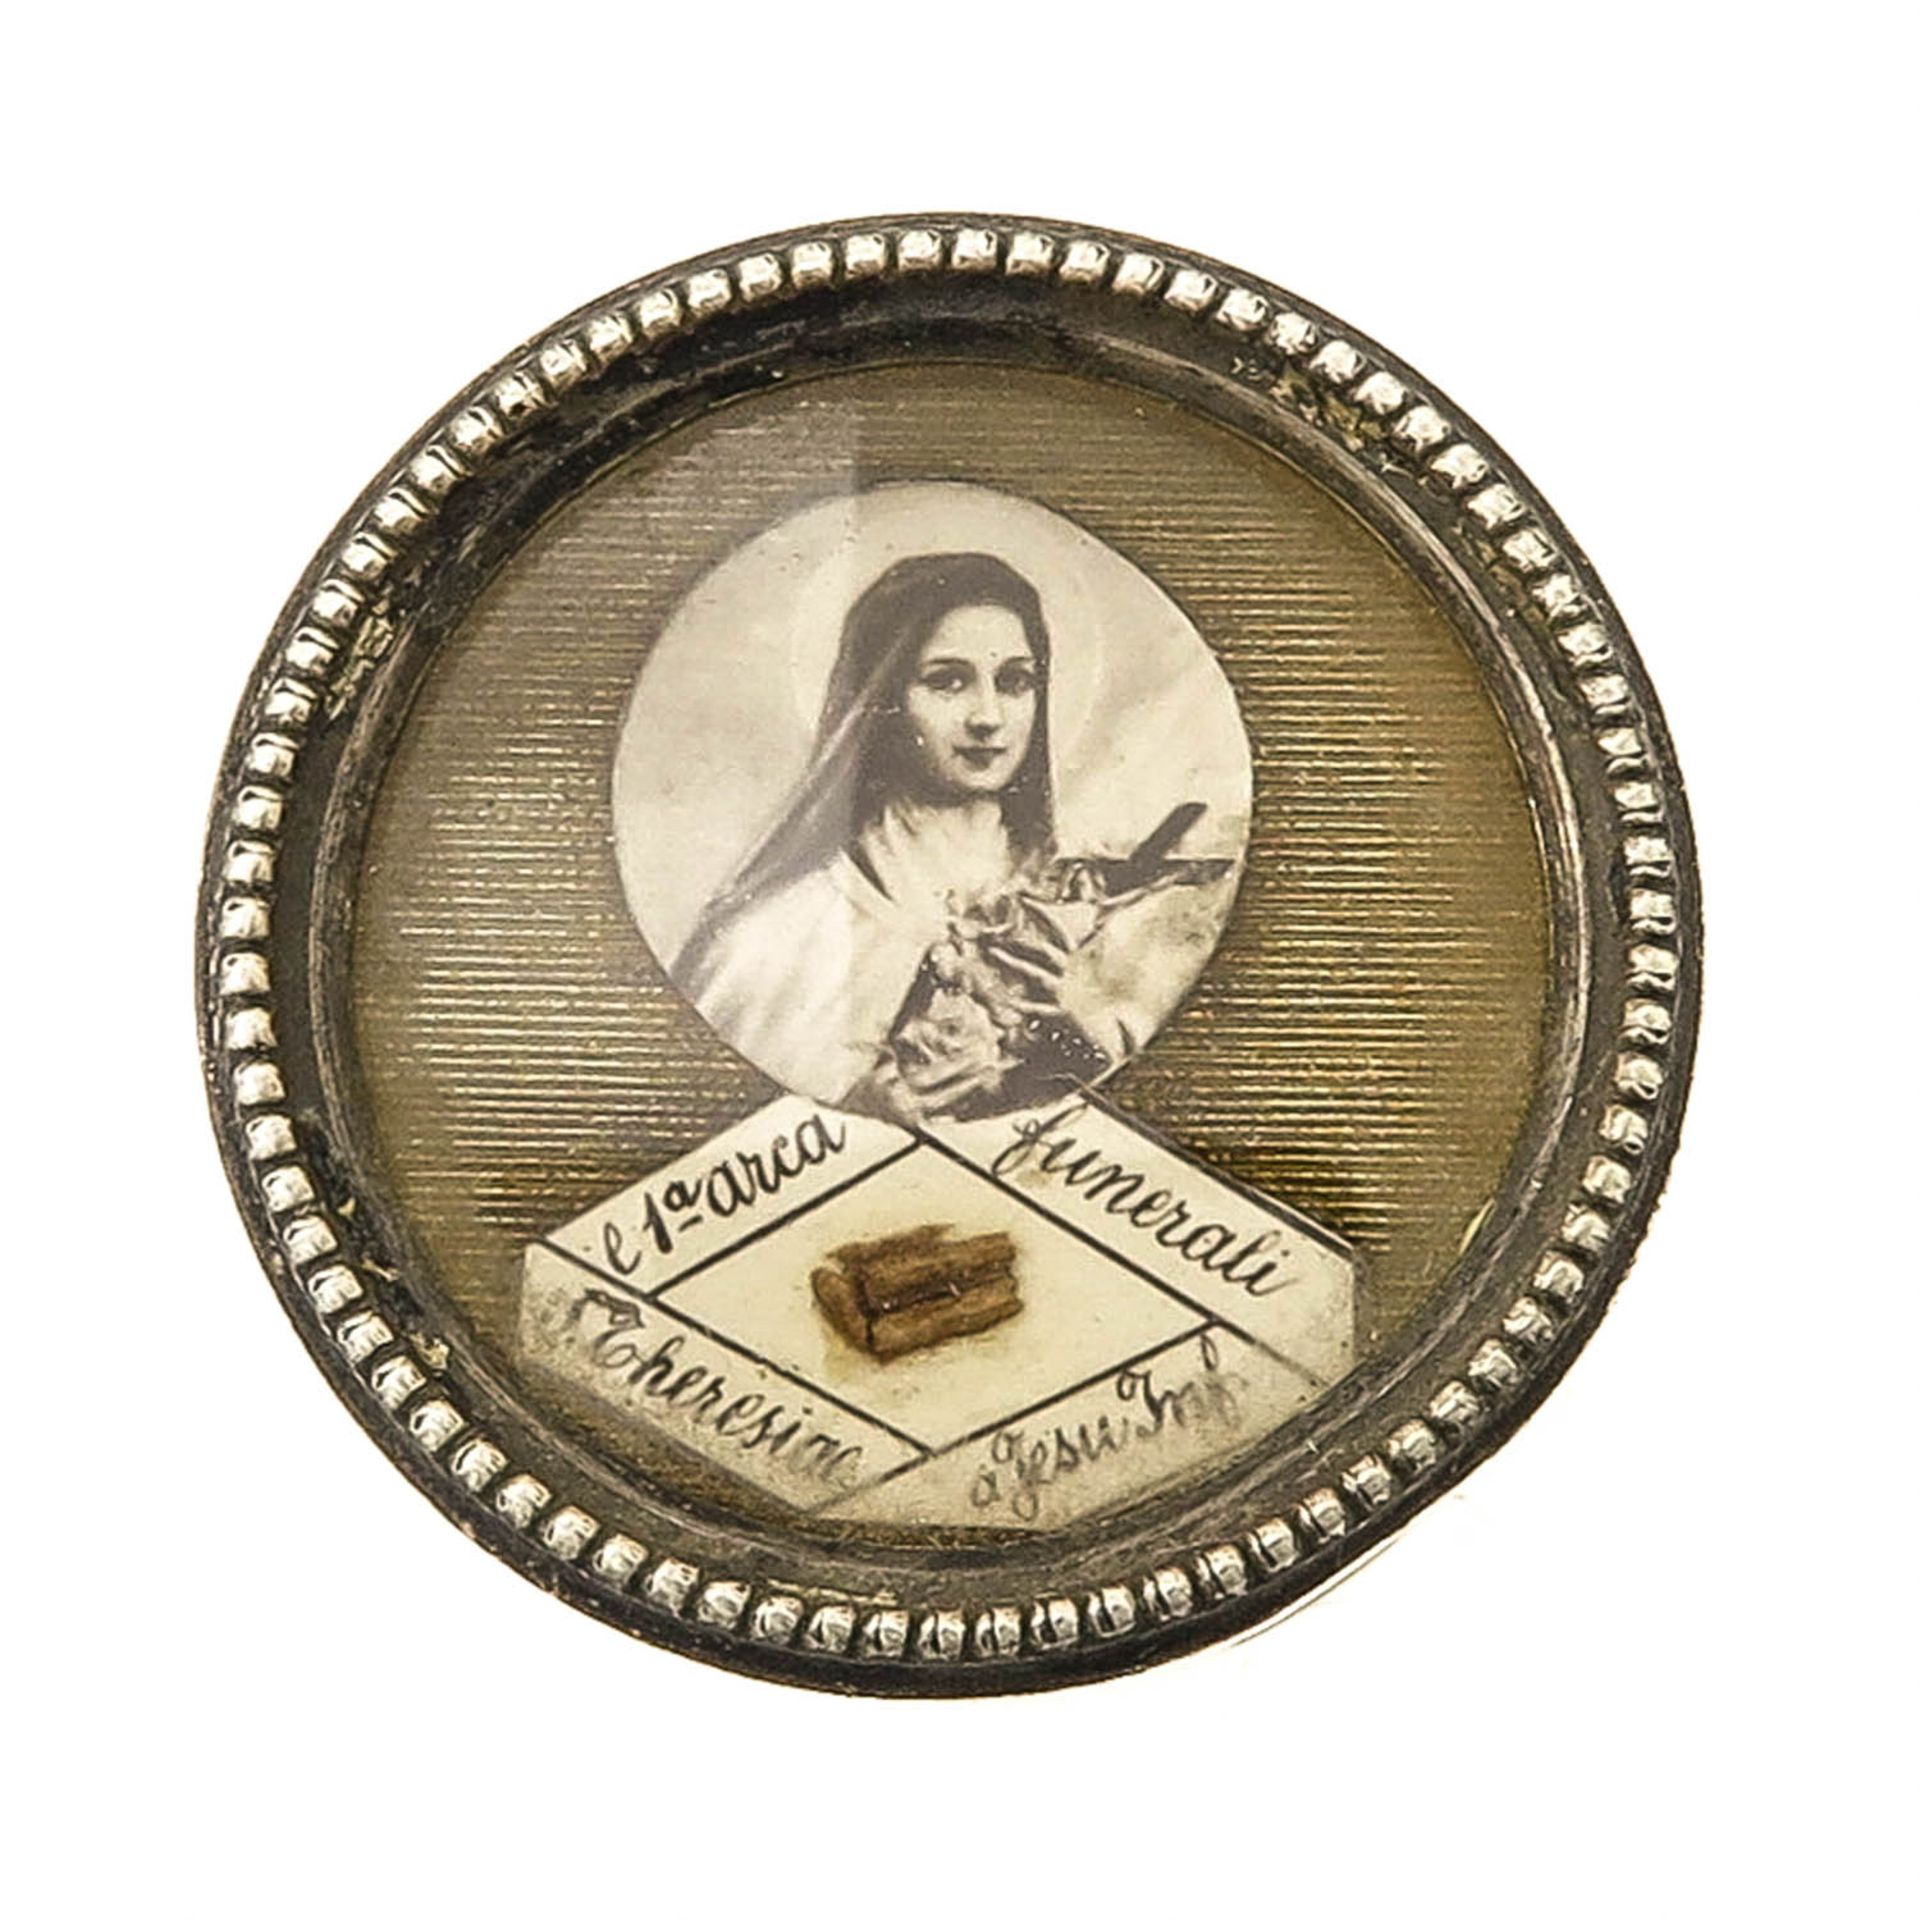 A Collection of 3 Relics from Saint Theresa - Image 3 of 8